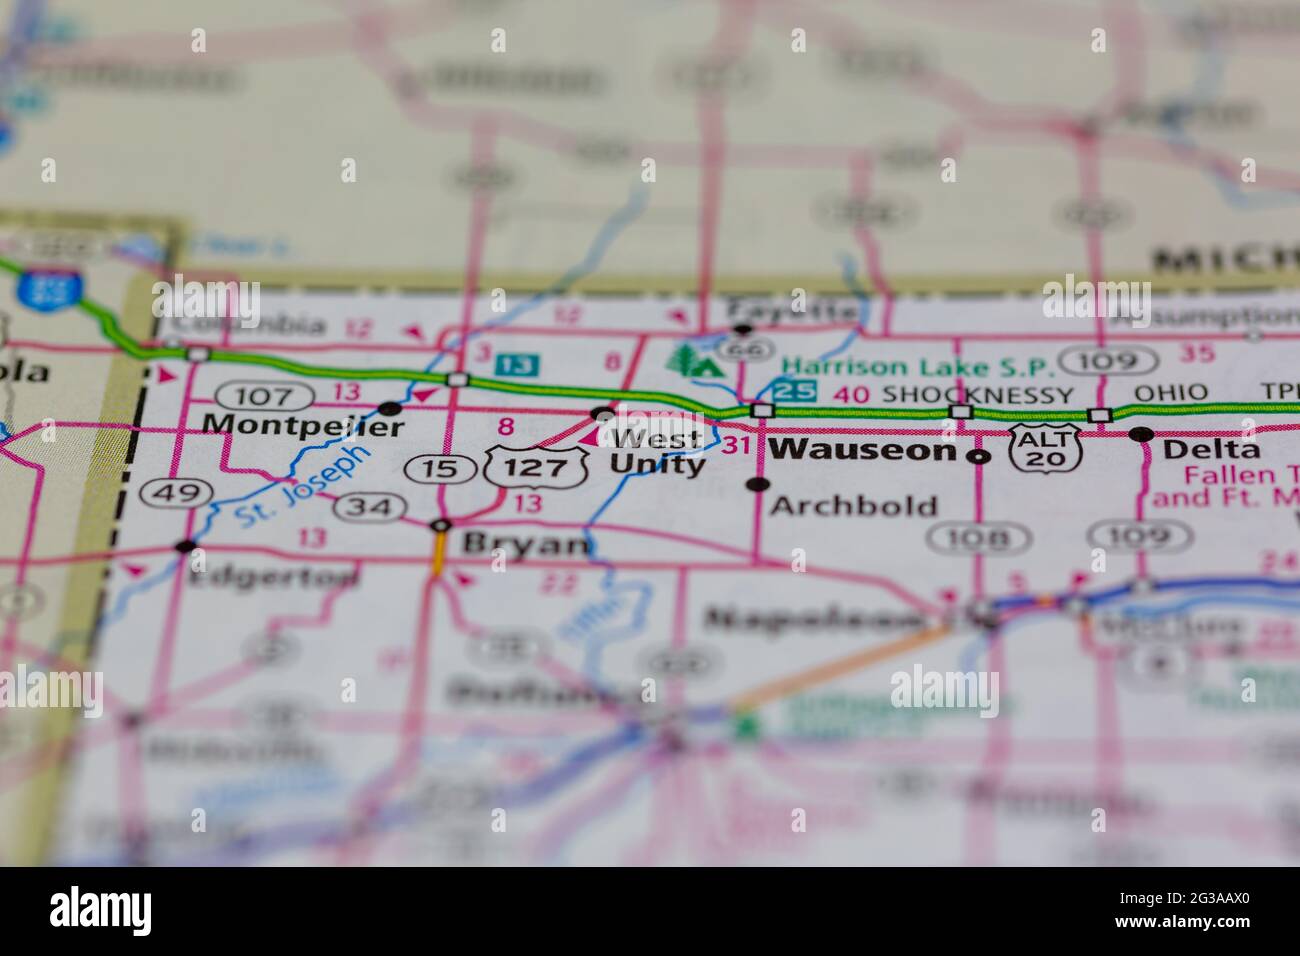 West Unity Ohio USA shown on a Geography map or Road map Stock Photo